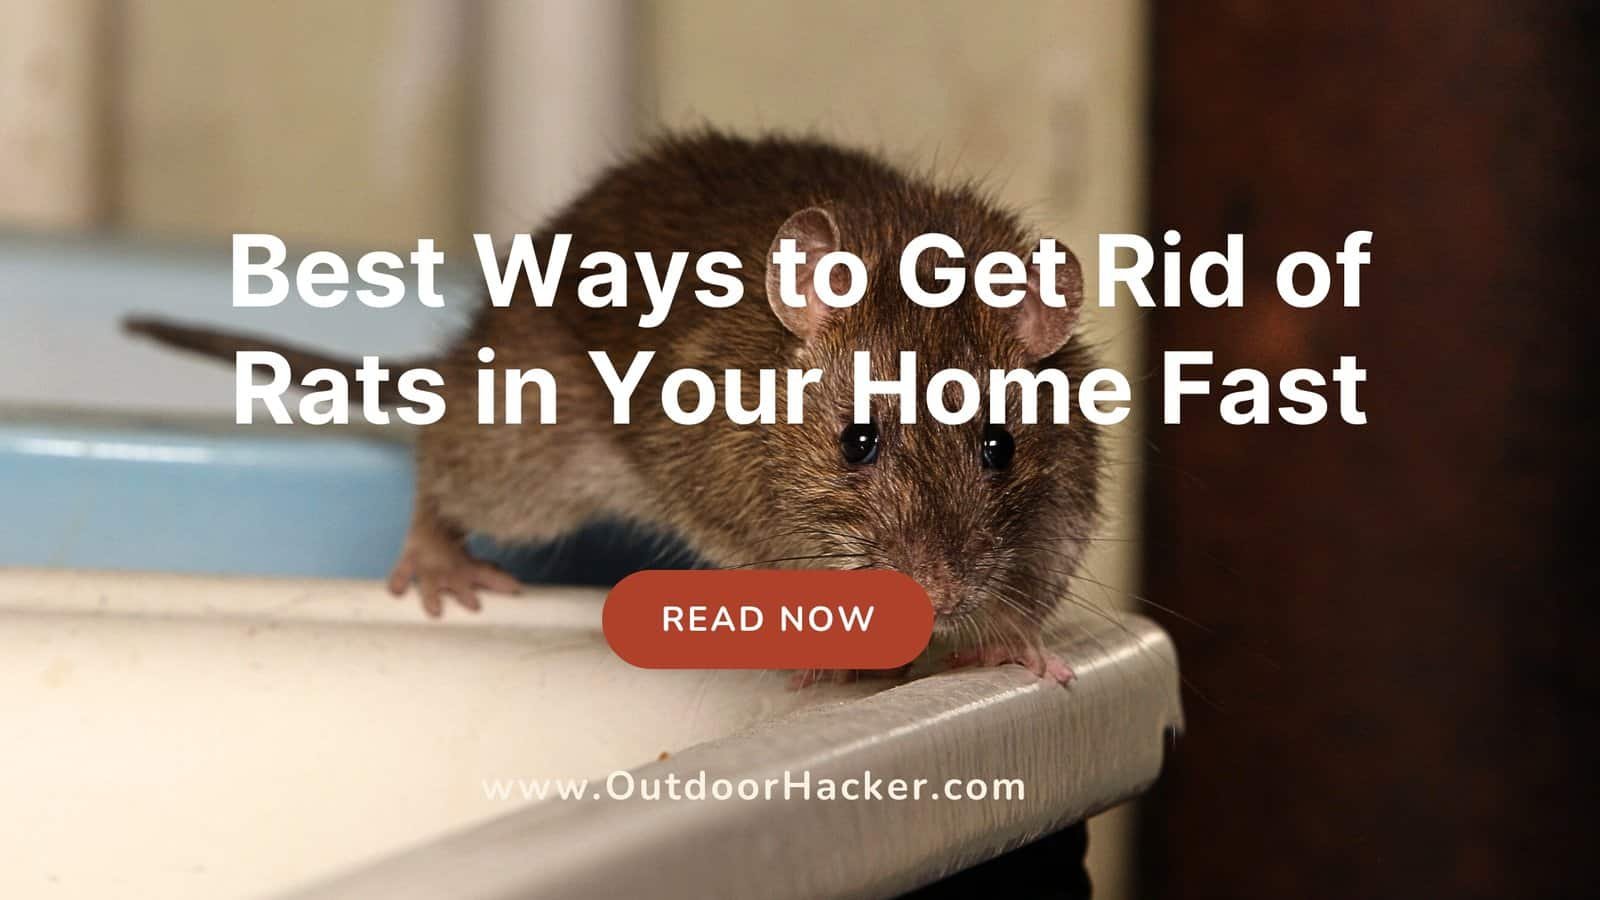 Best Ways to Get Rid of Rats in Your Home Fast